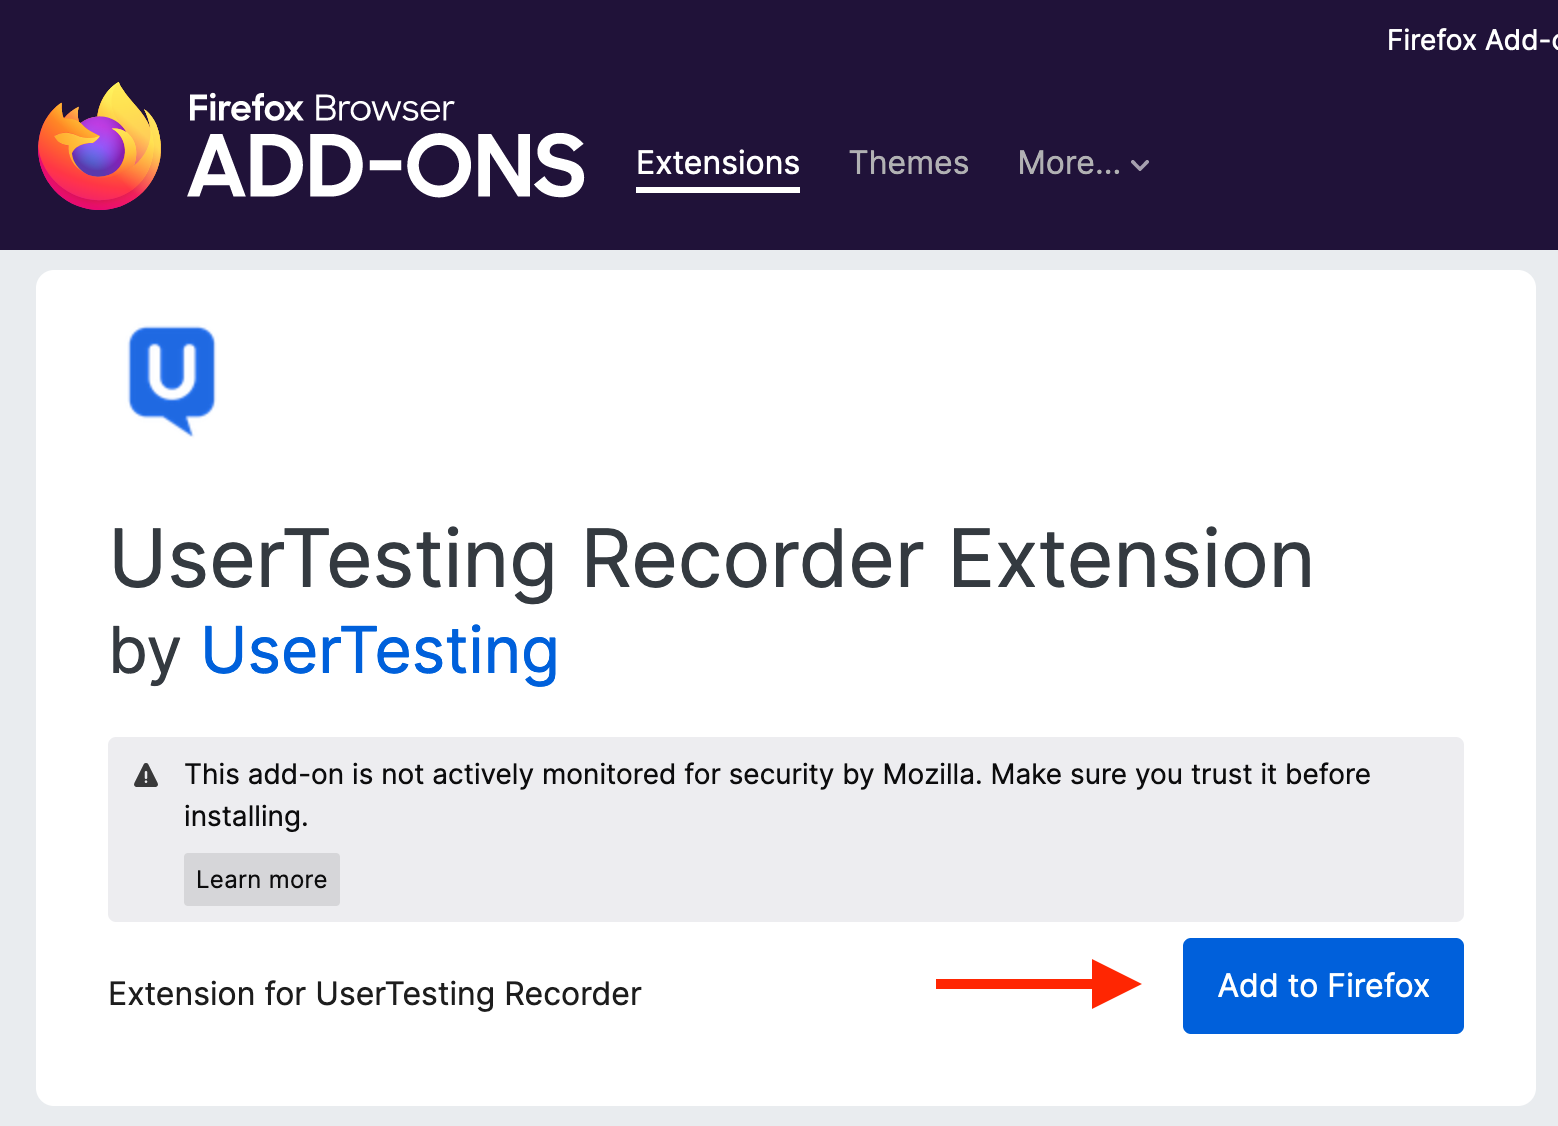 A_screenshot_of_the_UserTesting_Recorder_Extension_Firefox_Add-ons_listing_with_a_red_arrow_pointing_to_the_Add_to_Firefox_button._.png